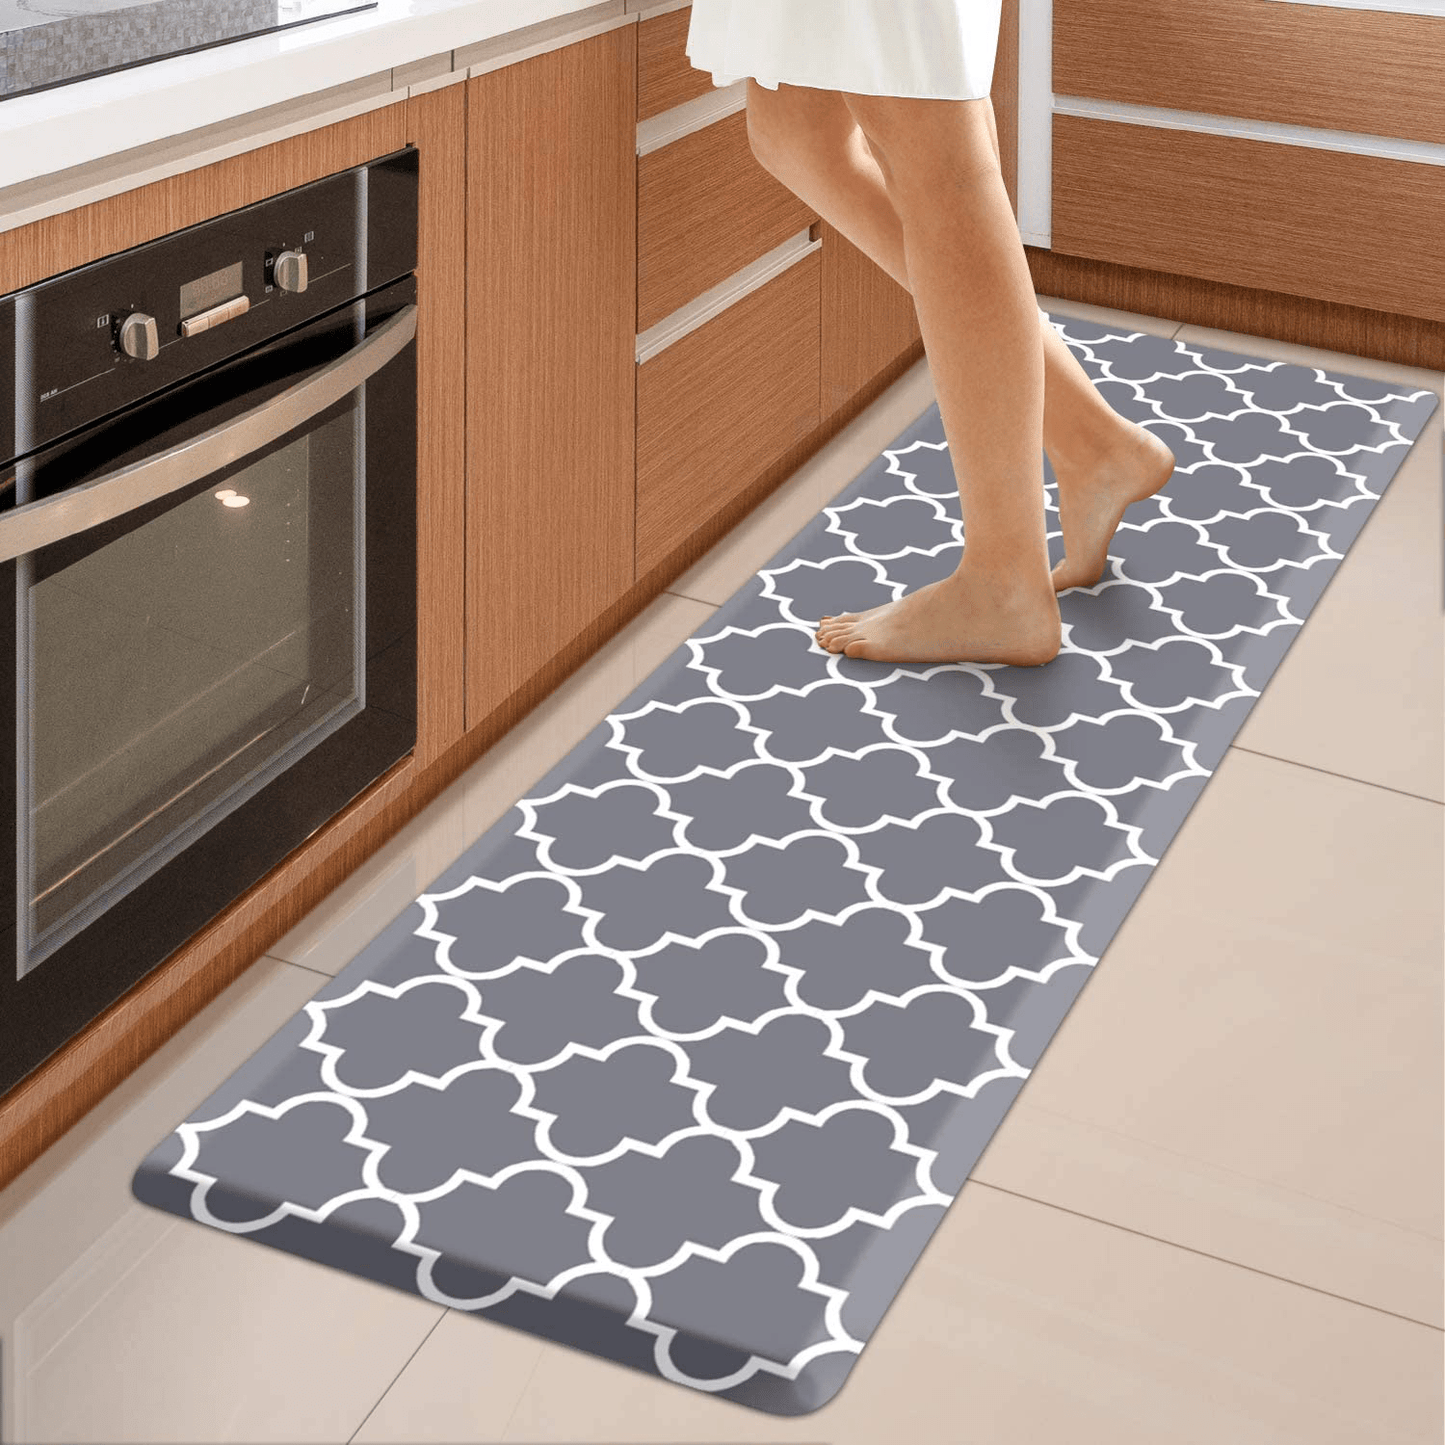 WISELIFE Kitchen Mat Cushioned Anti-Fatigue Kitchen Rug,17.3"X 39",Non Slip Waterproof Kitchen Mats and Rugs Heavy Duty PVC Ergonomic Comfort Mat for Kitchen, Floor Home, Office, Sink, Laundry , Grey Animals & Pet Supplies > Pet Supplies > Dog Supplies > Dog Treadmills WISELIFE Grey 17.3"x 60" 